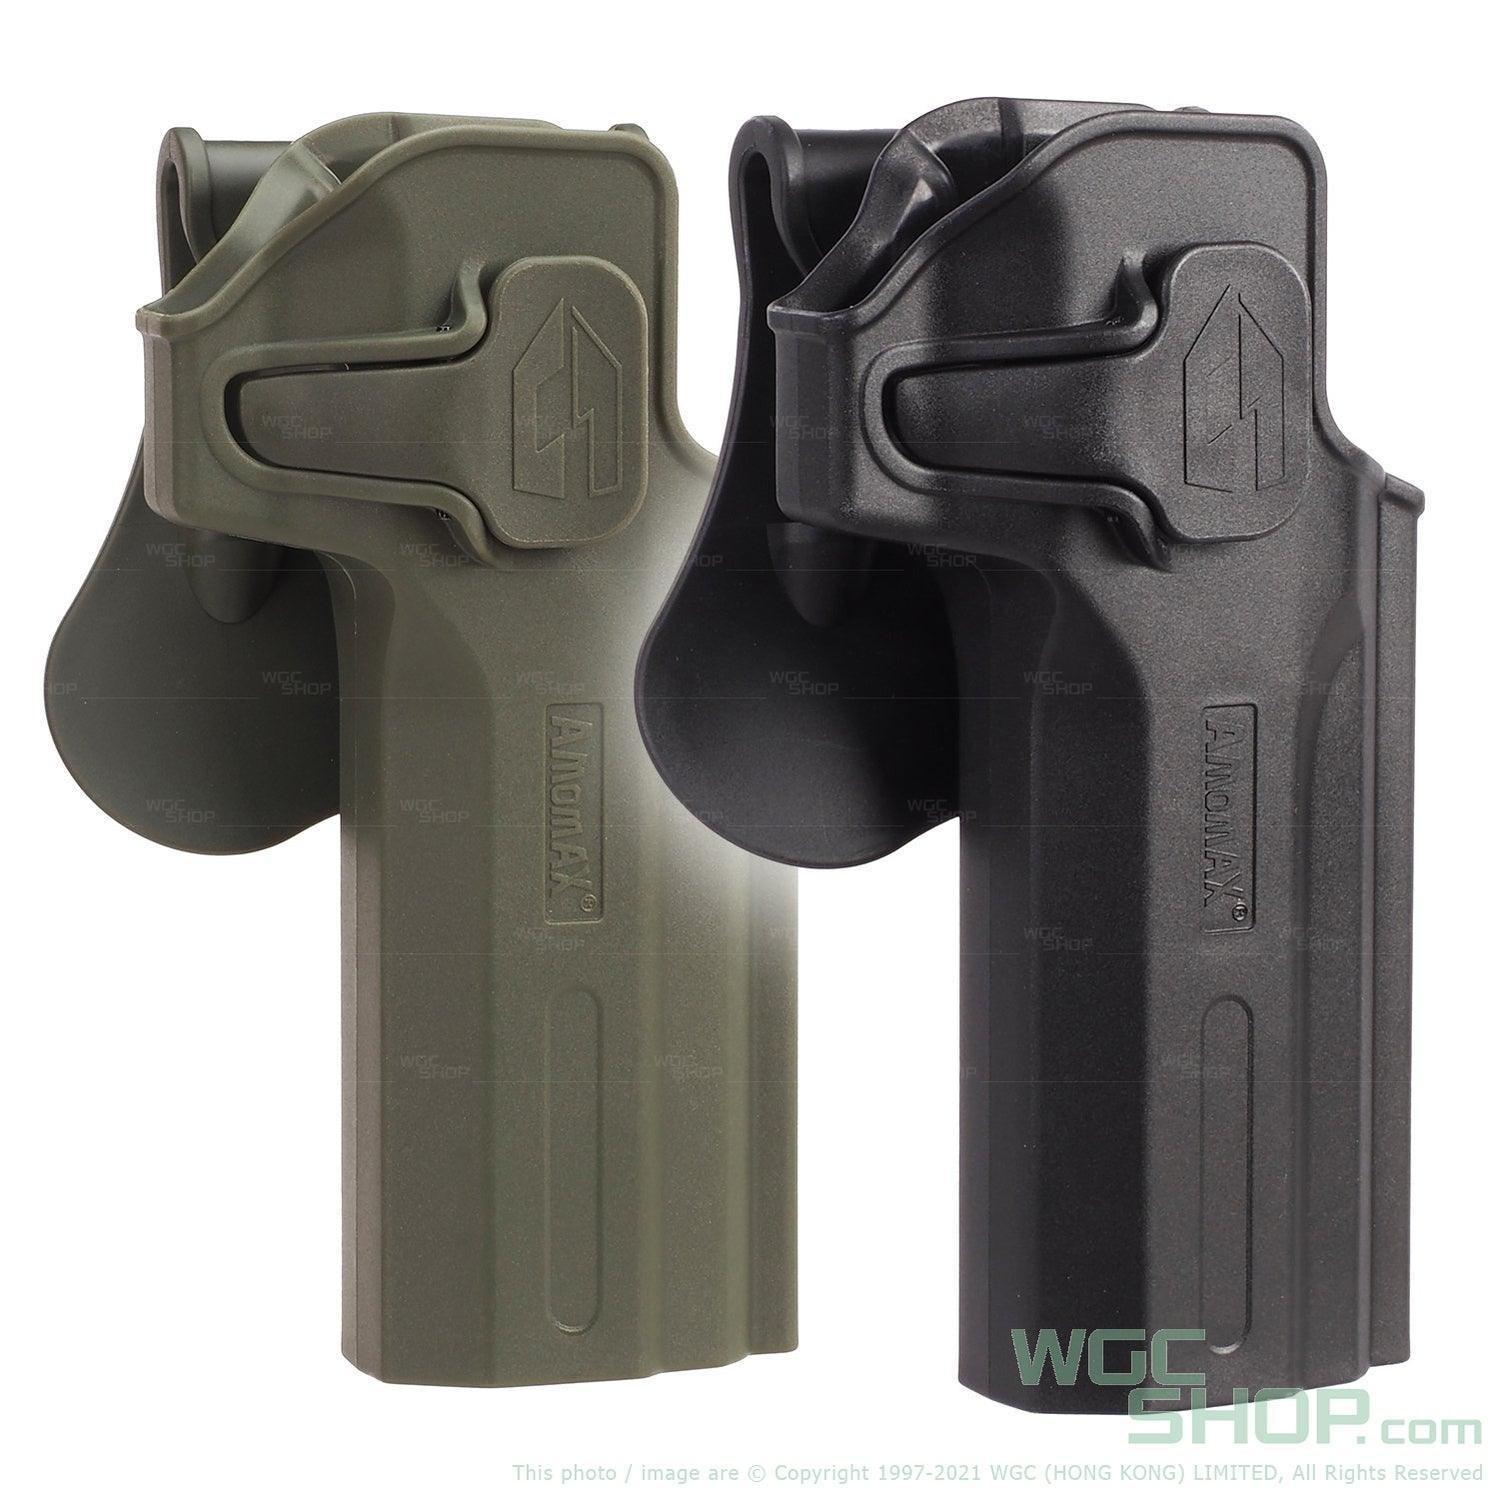 Holster for airsoft grenade launcher